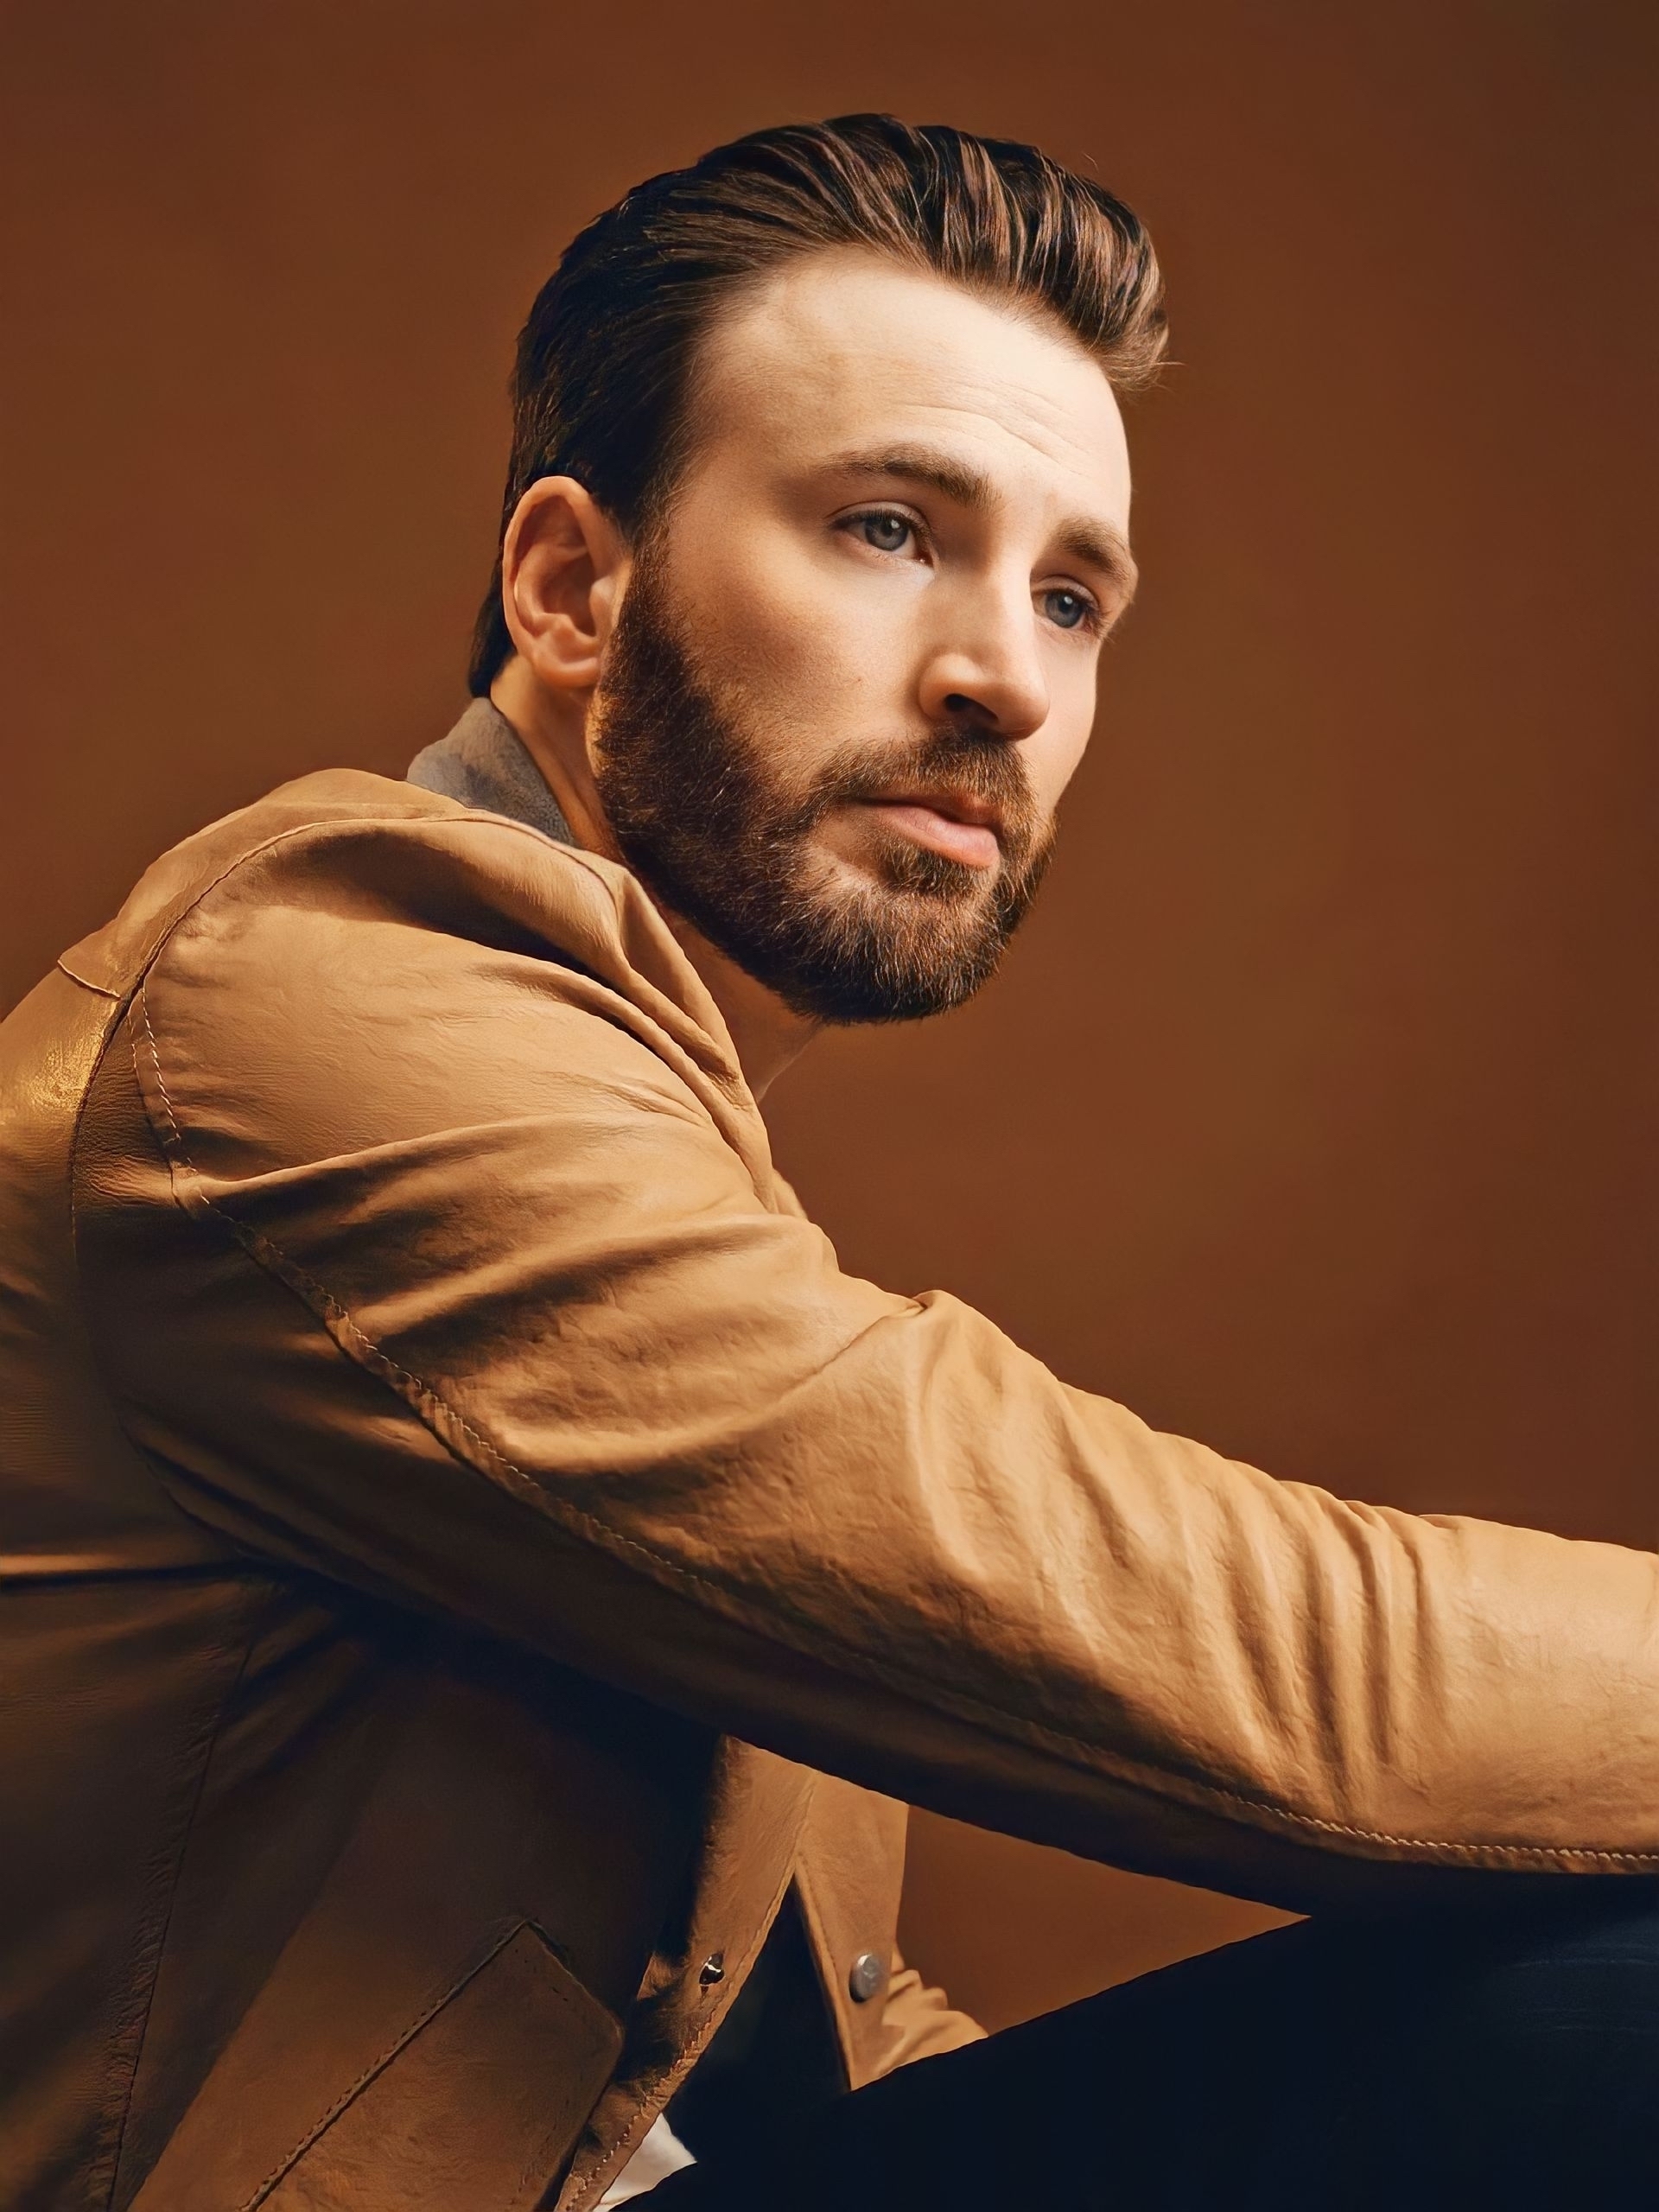 Chris Evans has officially been named People Magazine's Sexiest Man Alive for 2022. The magazine announced the news Monday night, along with a new photoshoot of the actor. 